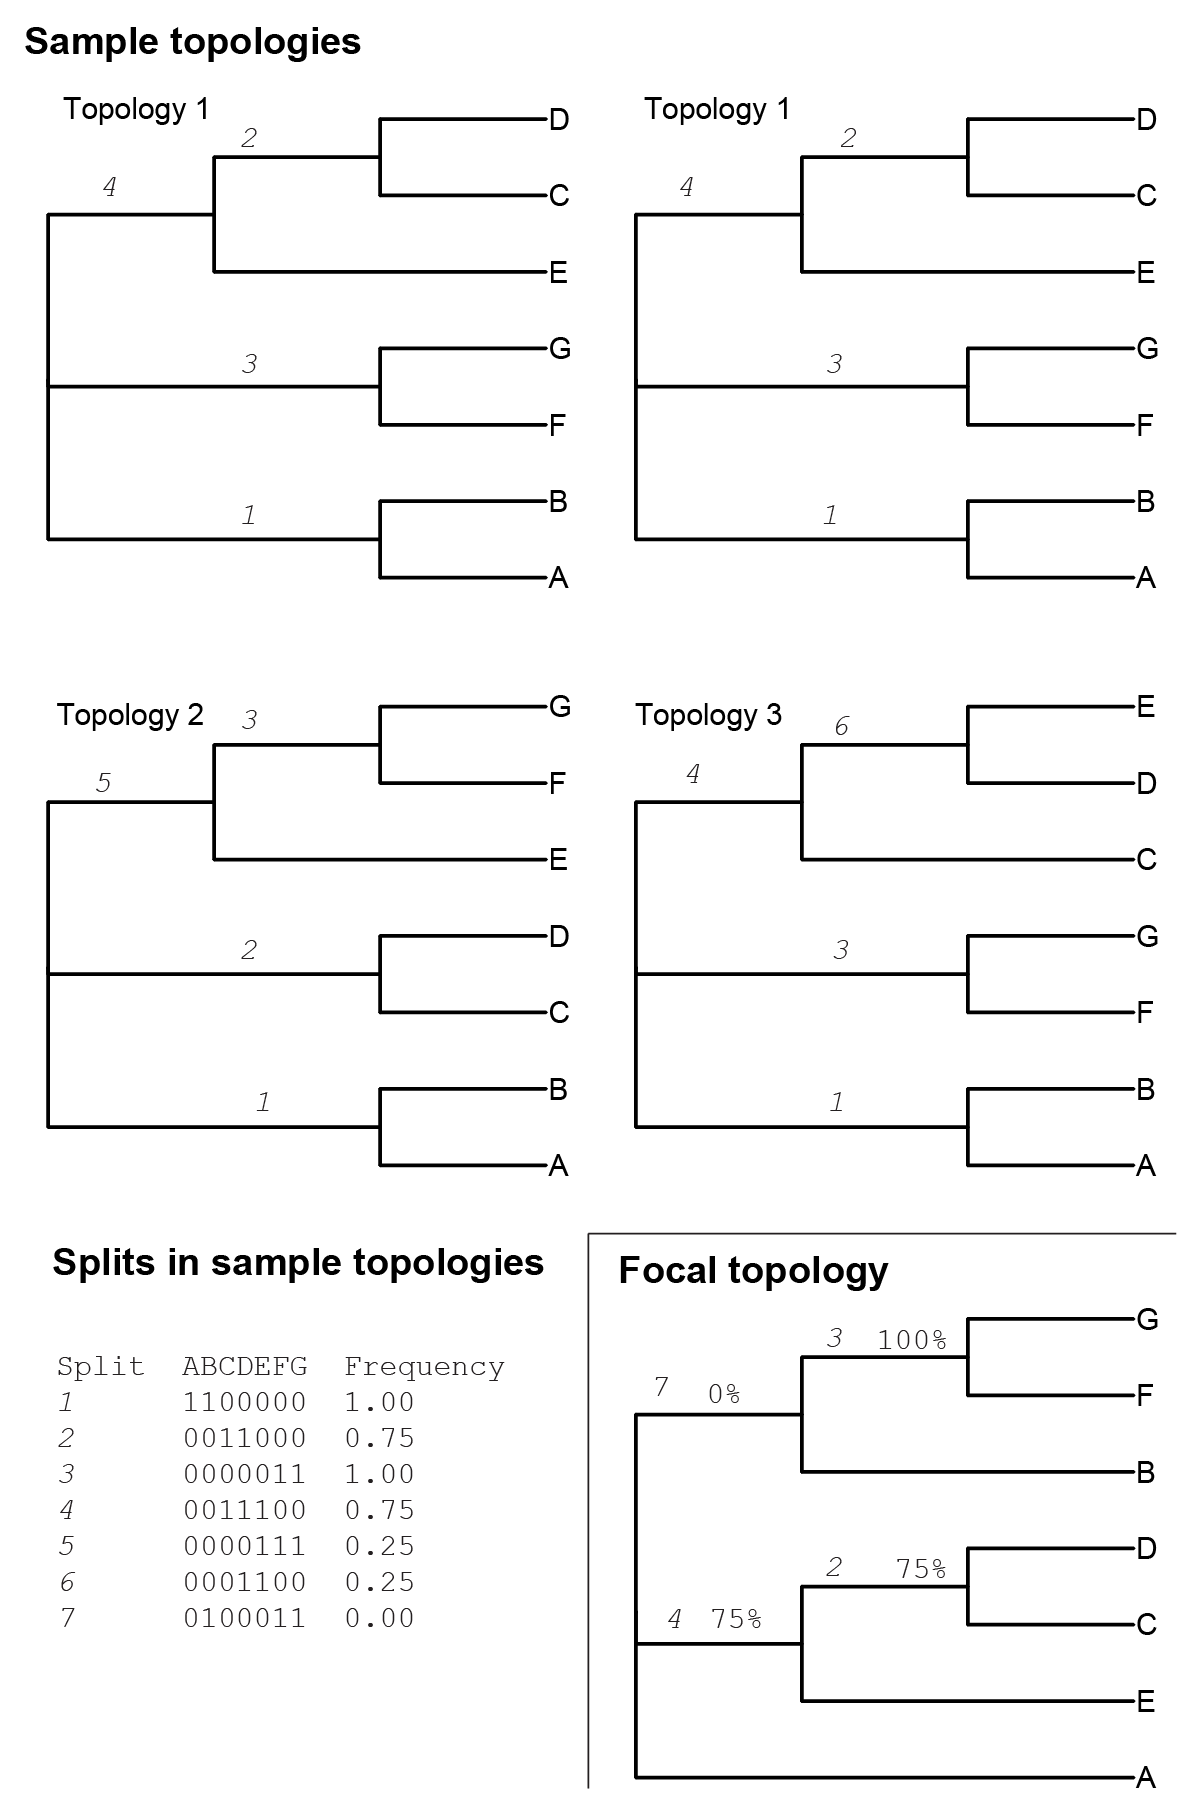 Four phylogenies in a sample, one focal phylogeny, and a table of splits found in all of these topologies. A split is a branch, with the identification of the branch based on which taxa are split from each other by the branch. The splits table shows the binary encoding of each split, where taxa on the same side of the split have the same binary number (0 or 1). The assignment of 1 or 0 to a particular side of the split is arbitrary. Identical splits are labeled consistently above the branches throughout the figure. The frequency of the split is based on the proportion of sample phylogenies that contain the splits. The frequencies of the sample splits are shown as percentages on the branches in the focal topology.